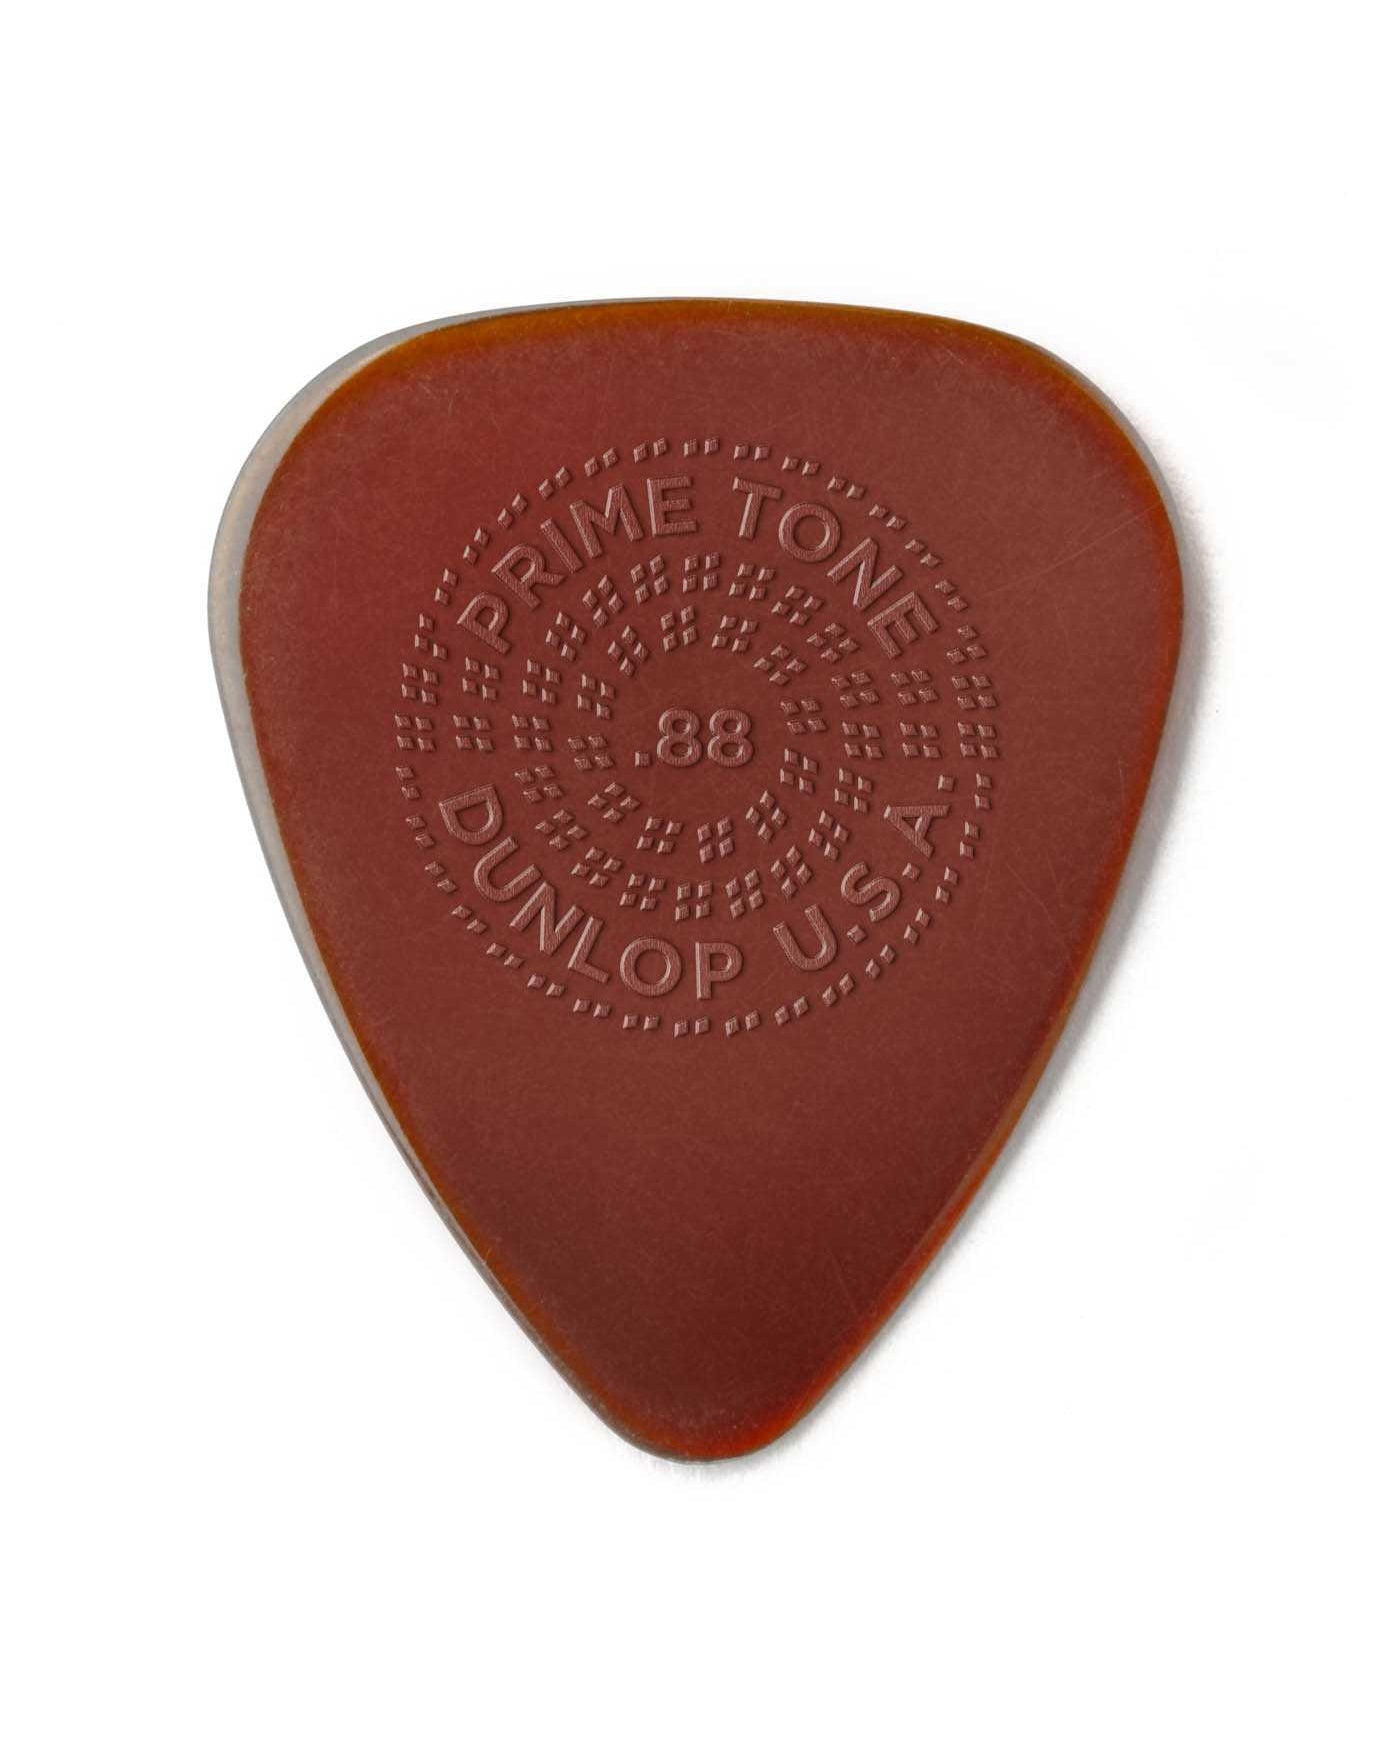 Image 1 of Dunlop Primetone Sculpted Plectra, Ultex Standard with Grip, 0.88MM Thick, Three Pack - SKU# PK510-088 : Product Type Accessories & Parts : Elderly Instruments